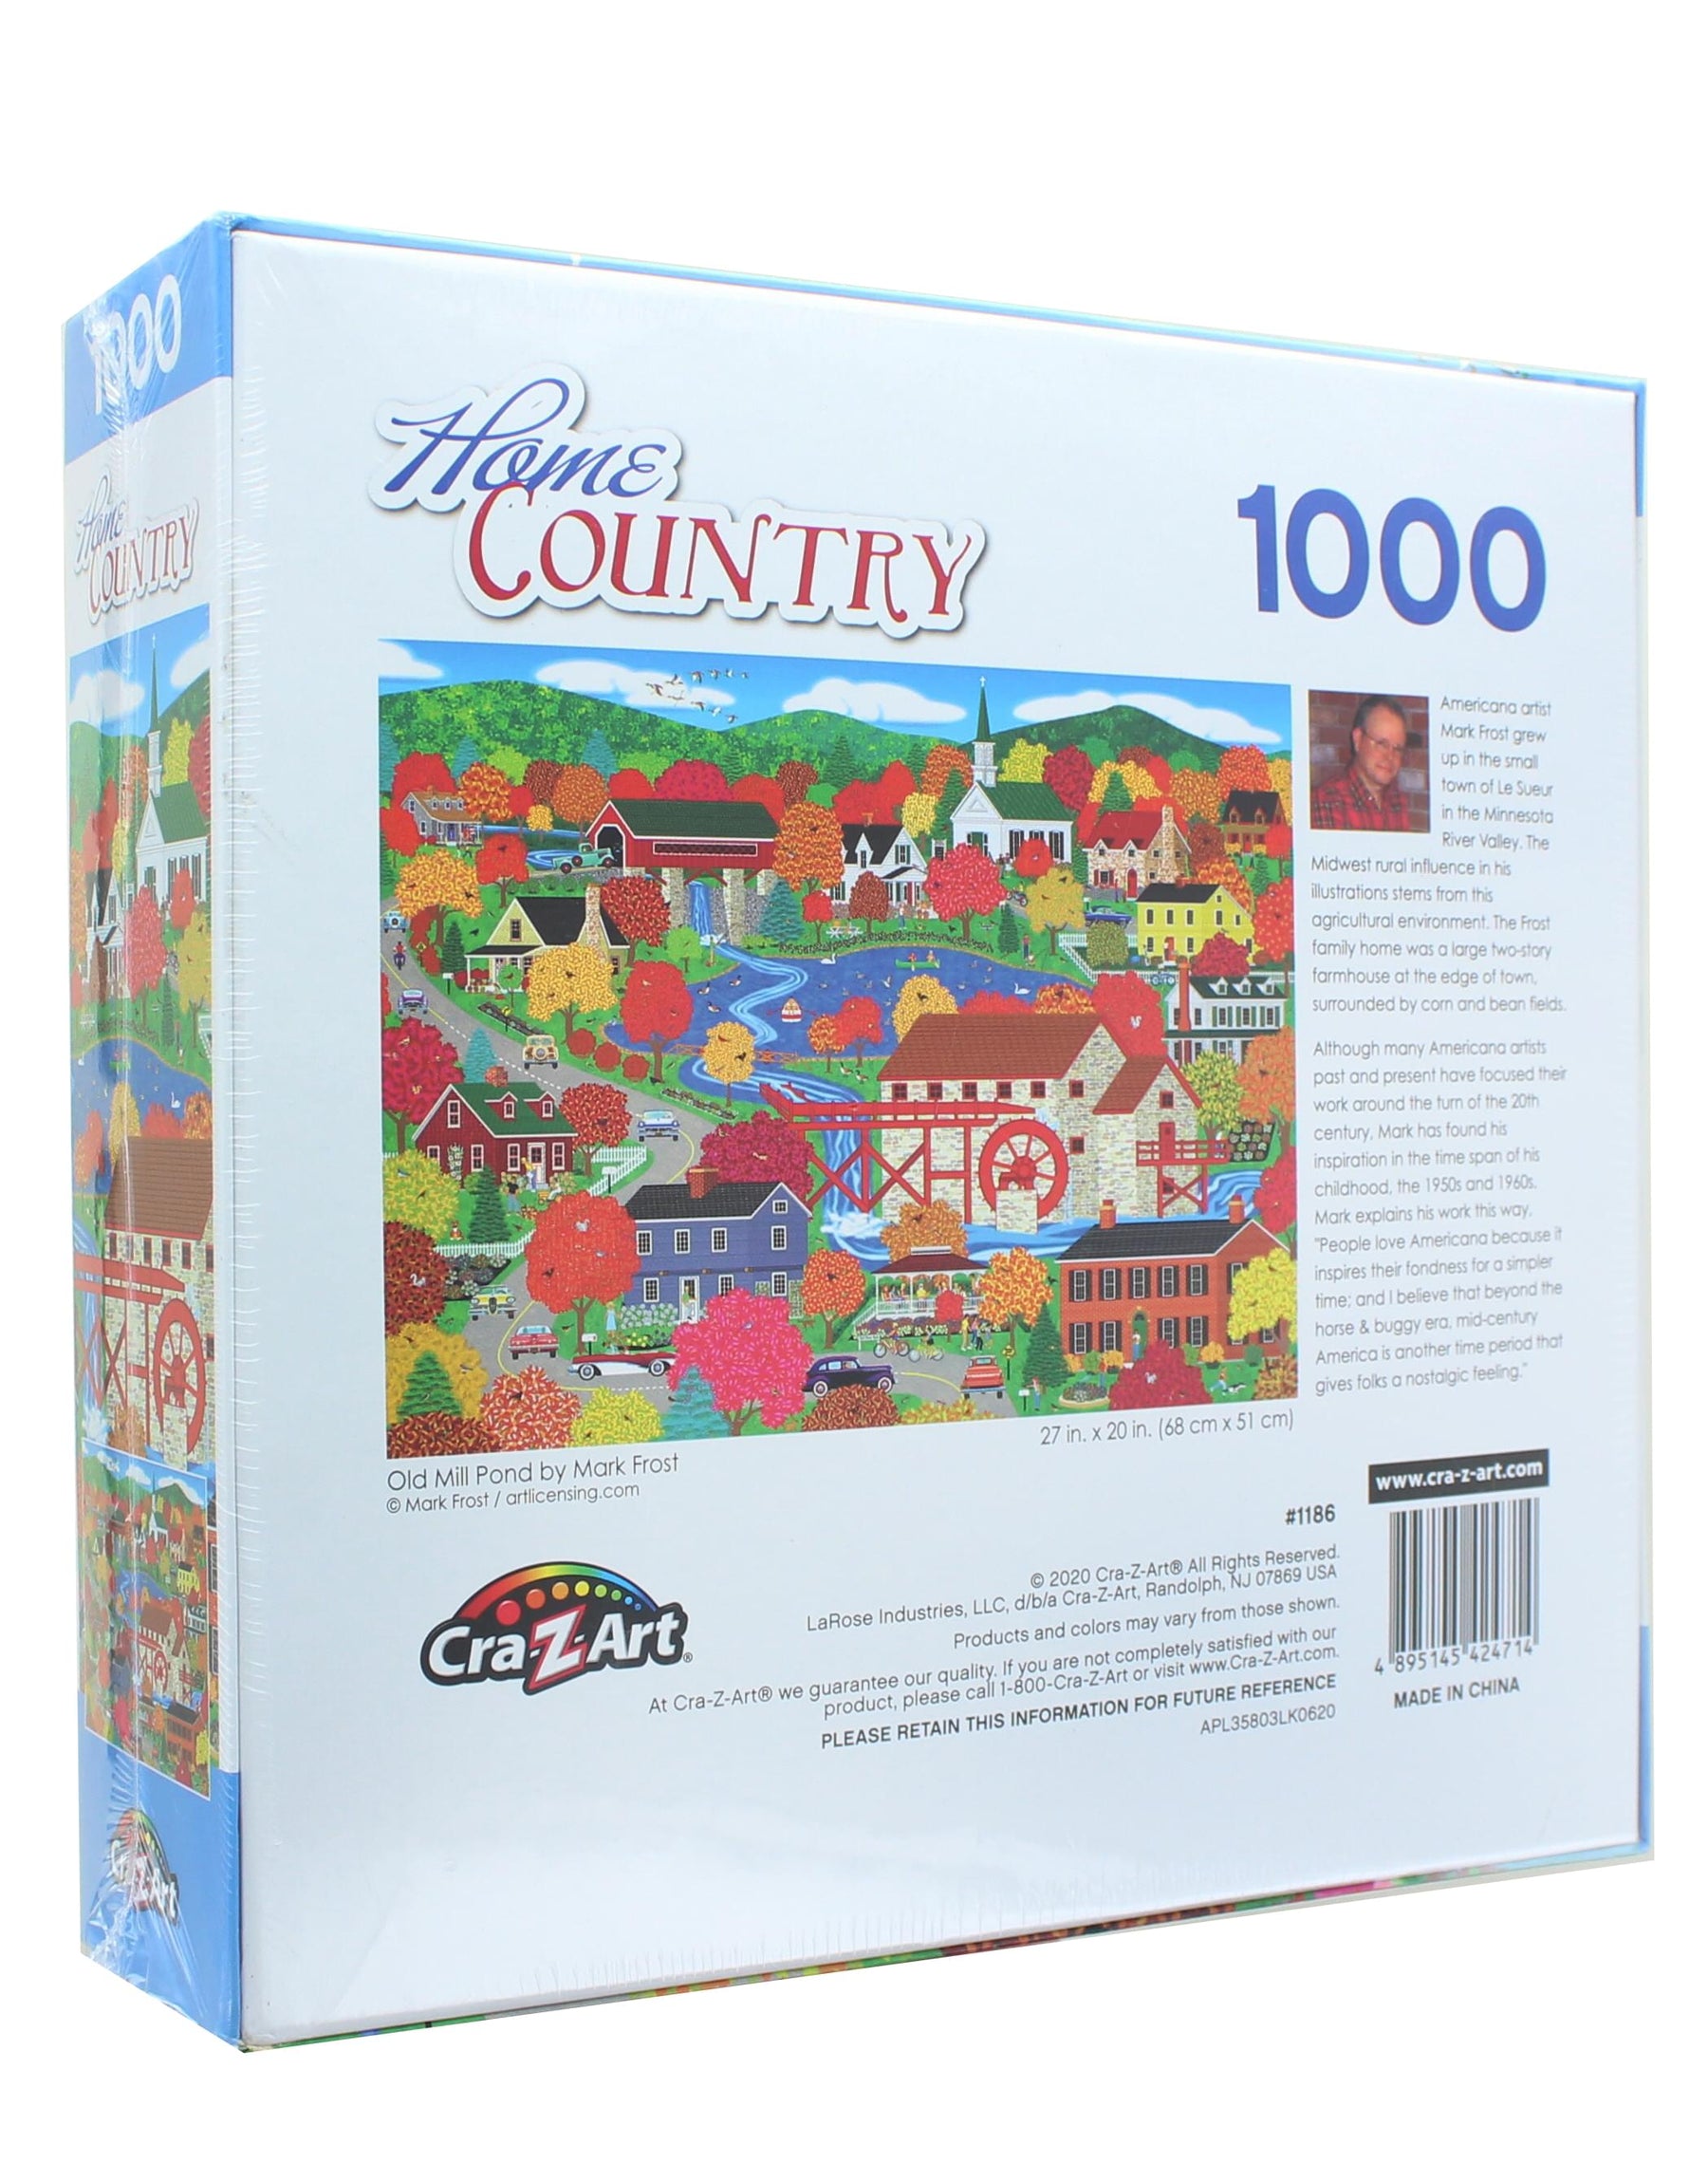 Old Mill Pond 1000 Piece Jigsaw Puzzle